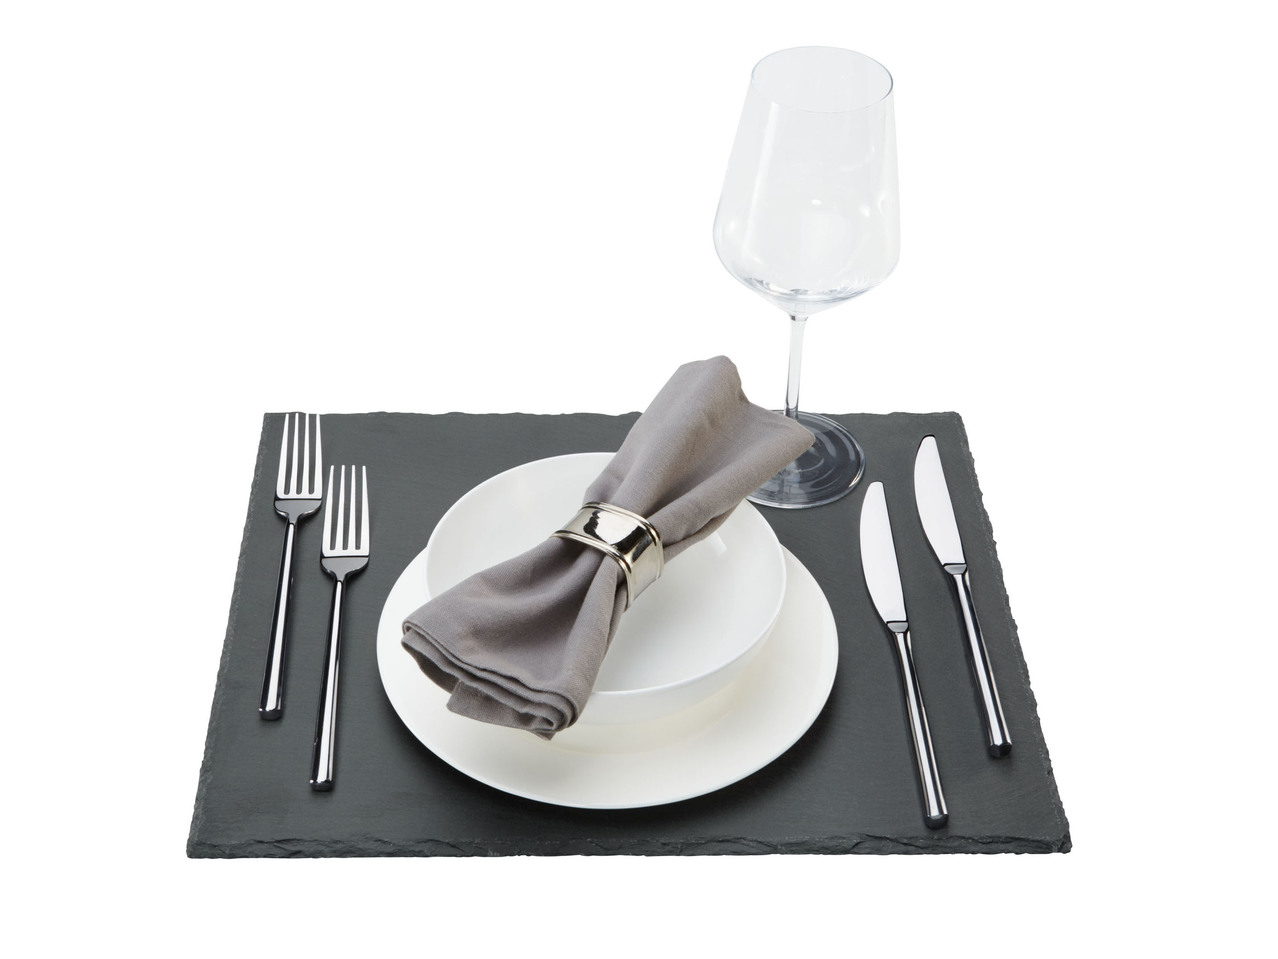 Tray or Placemats made from Slate